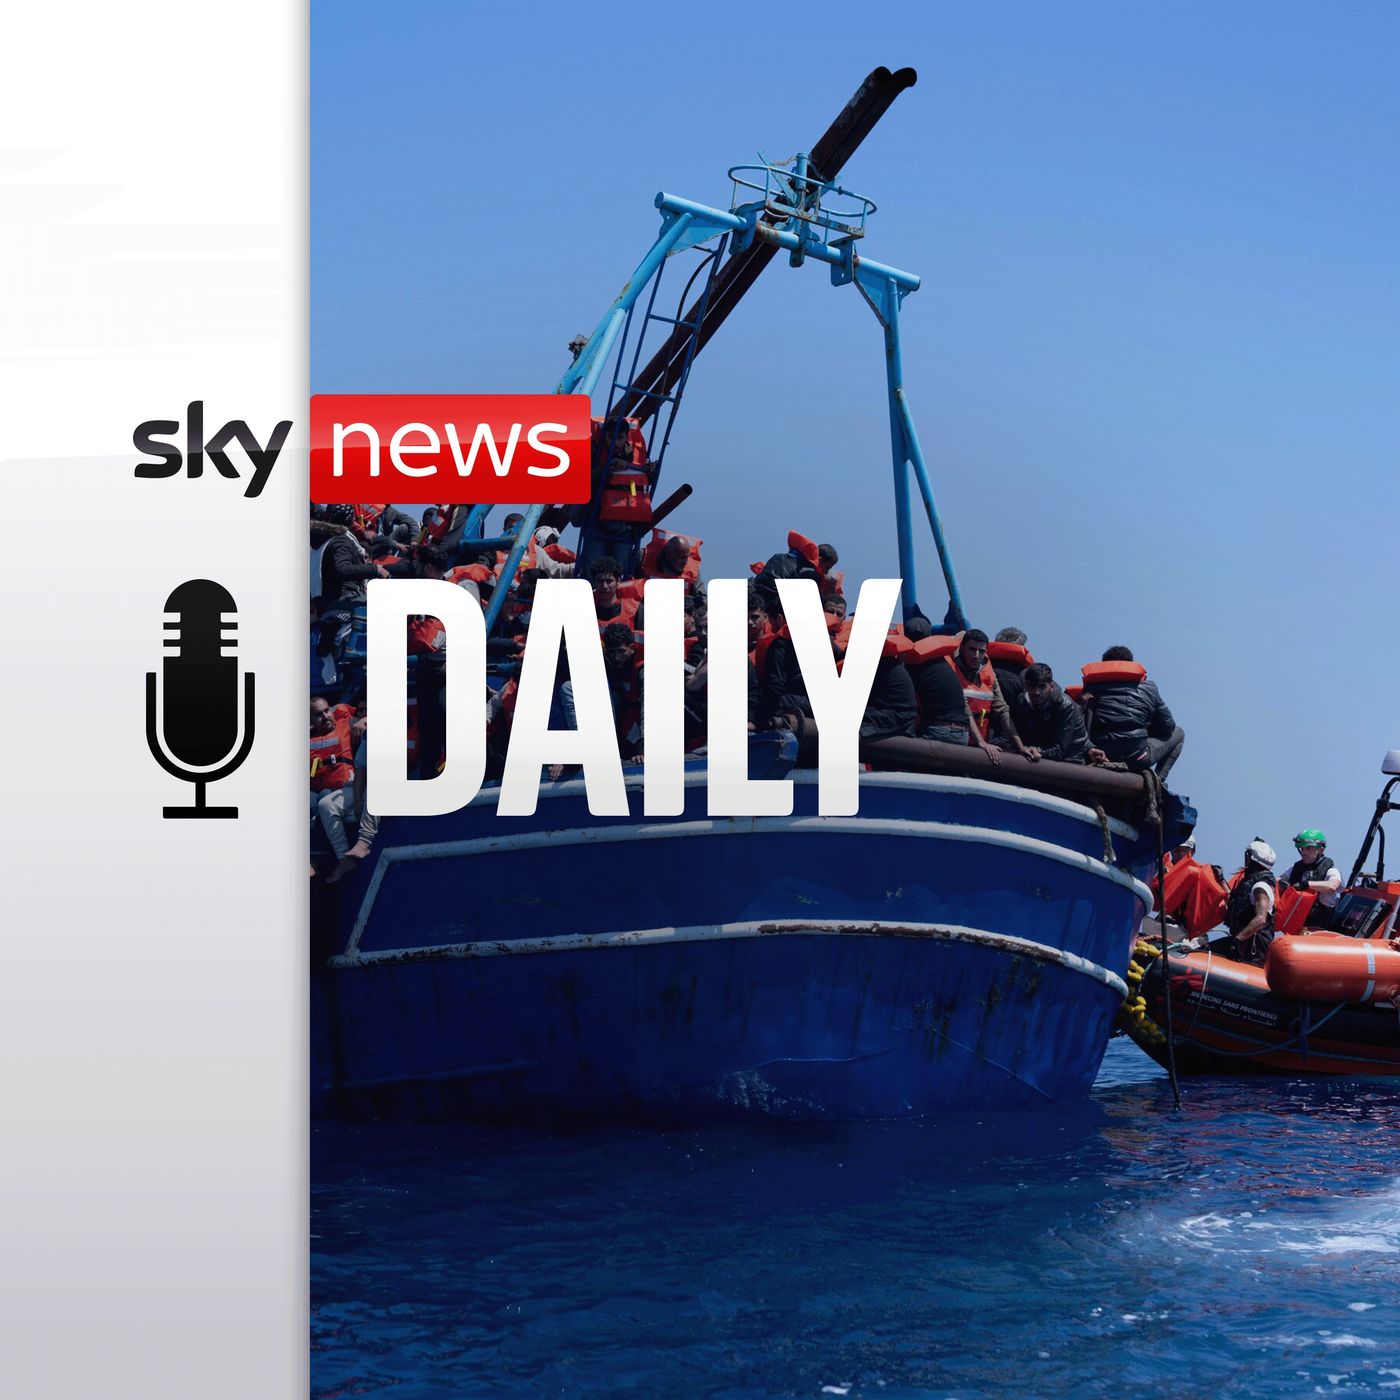 Migrant crisis: The people found at sea